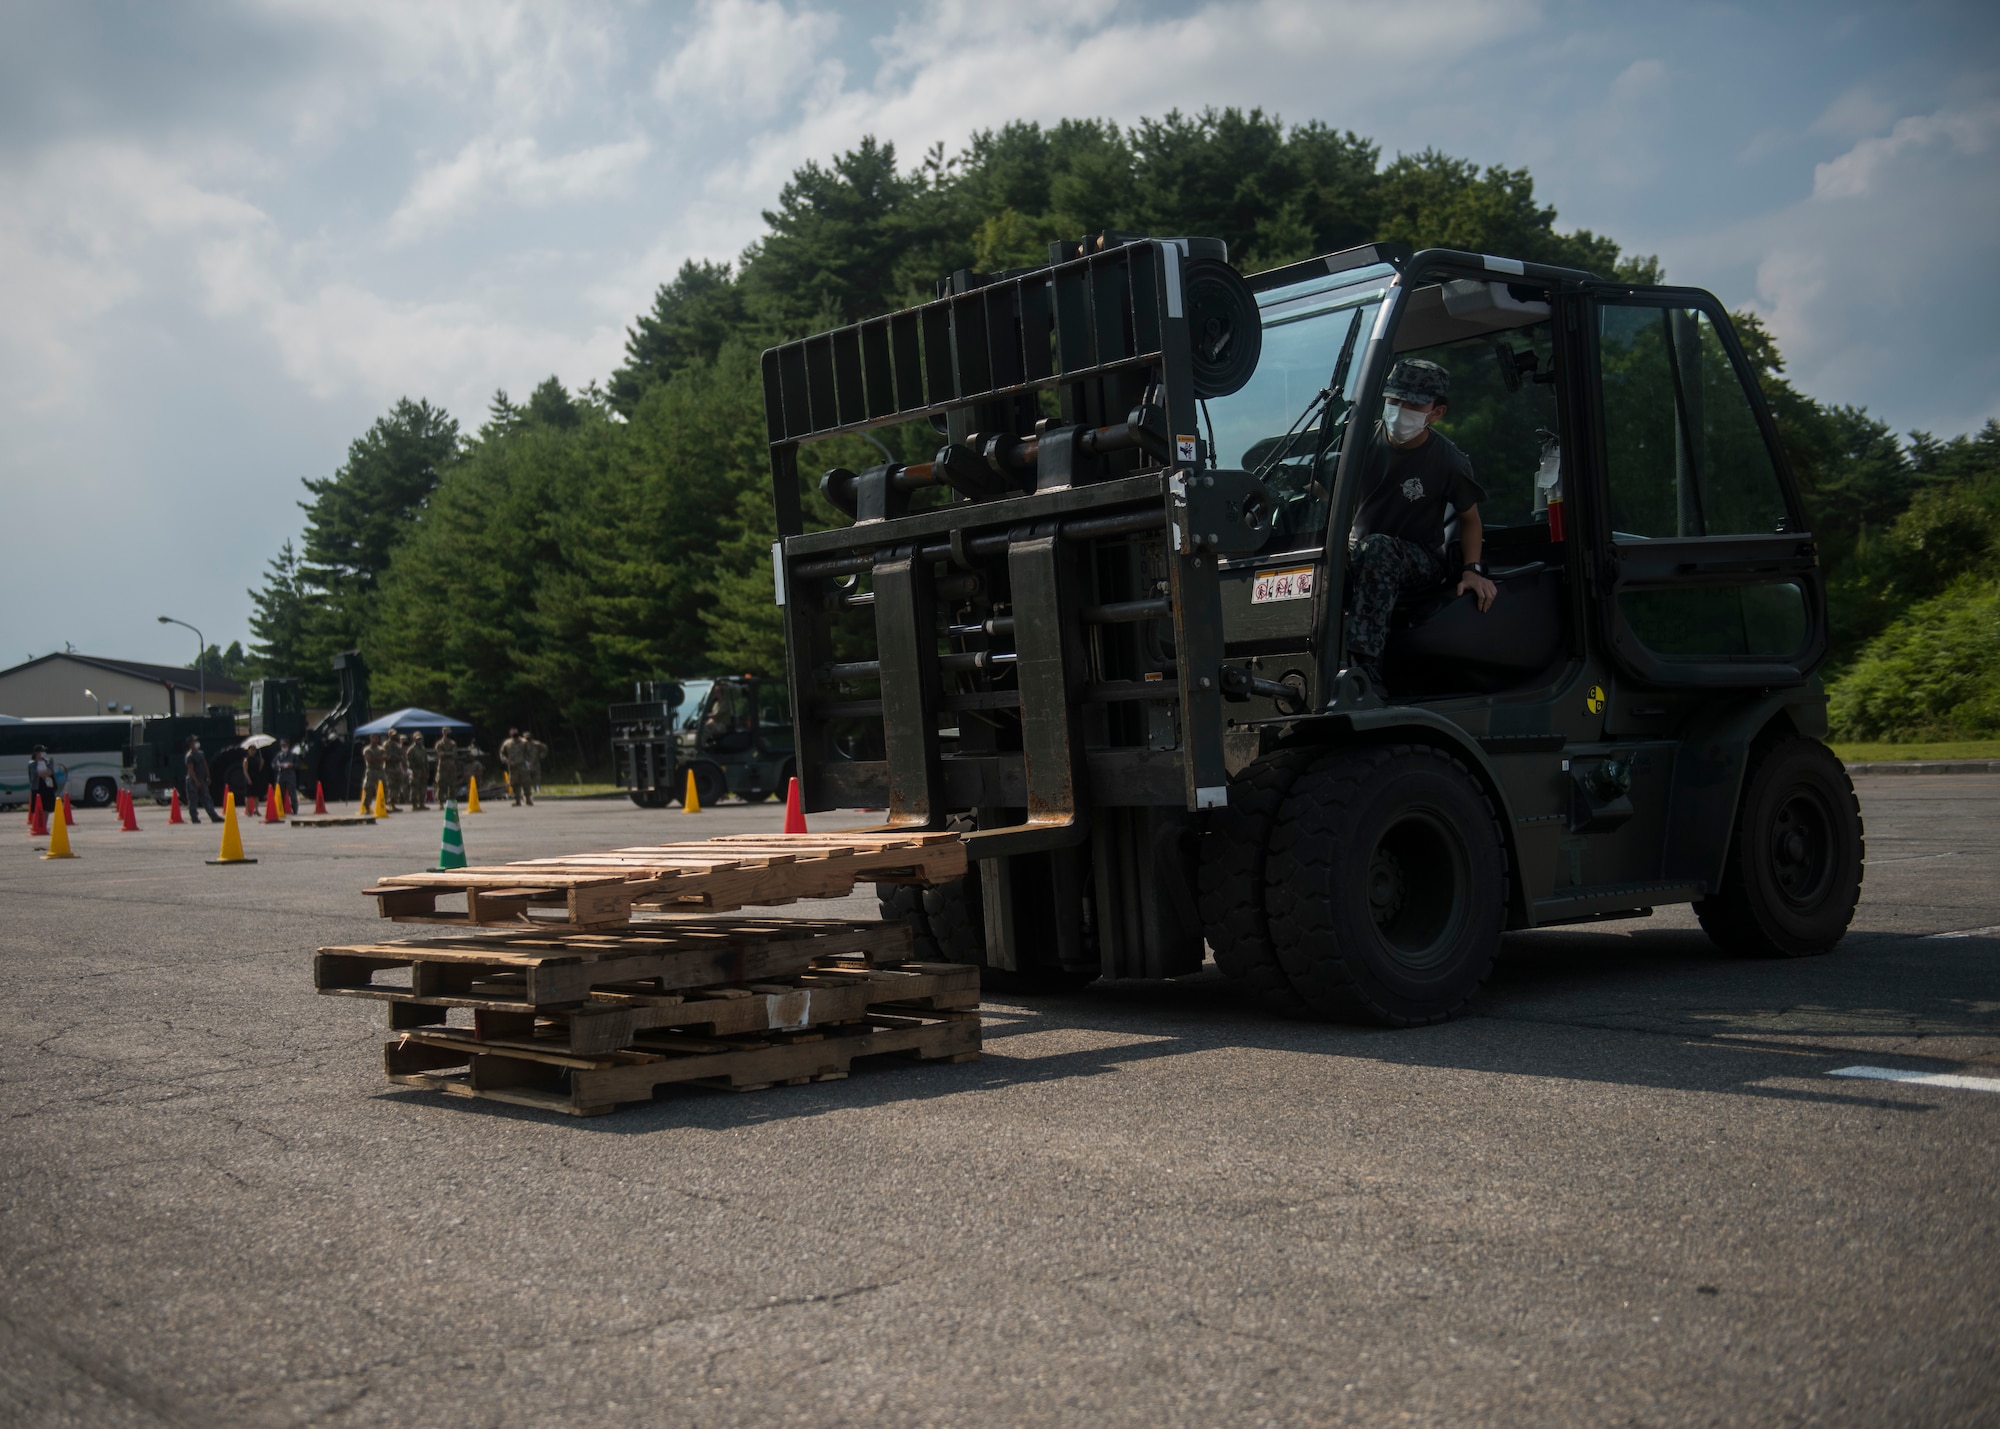 JASDF member operates a forklift to stack wooden pallets on the ground.